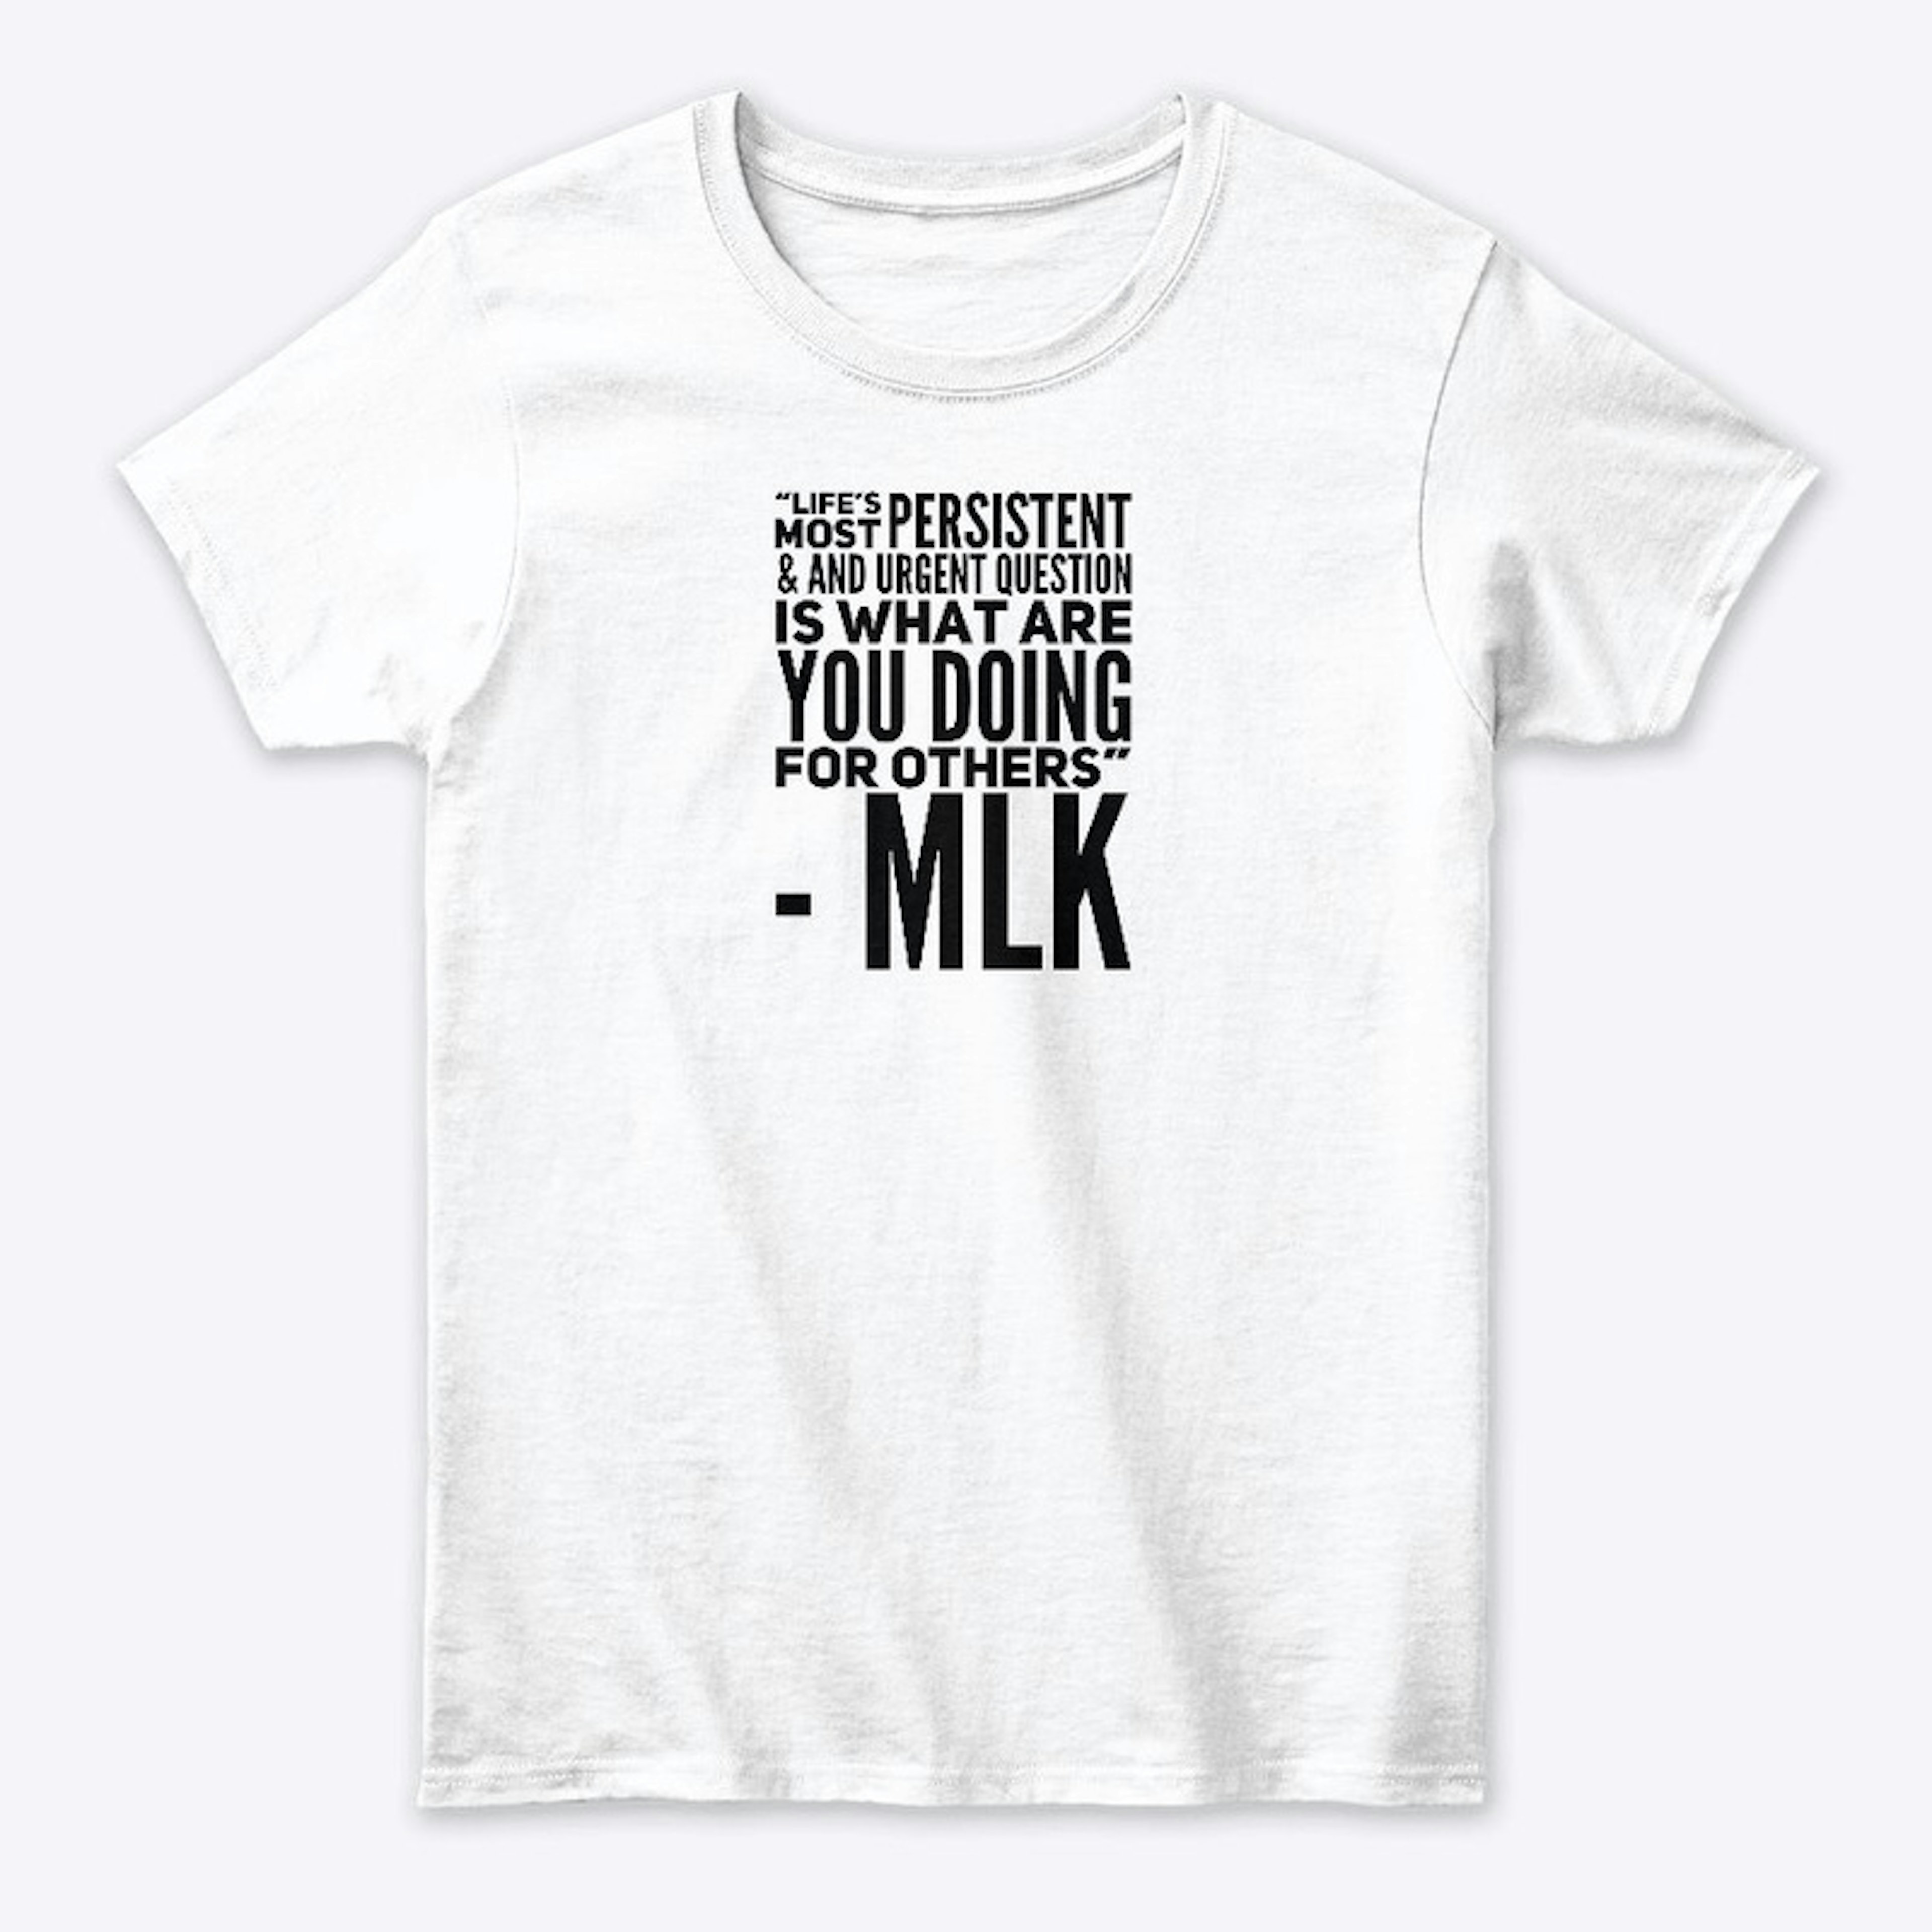 The MLK Collection